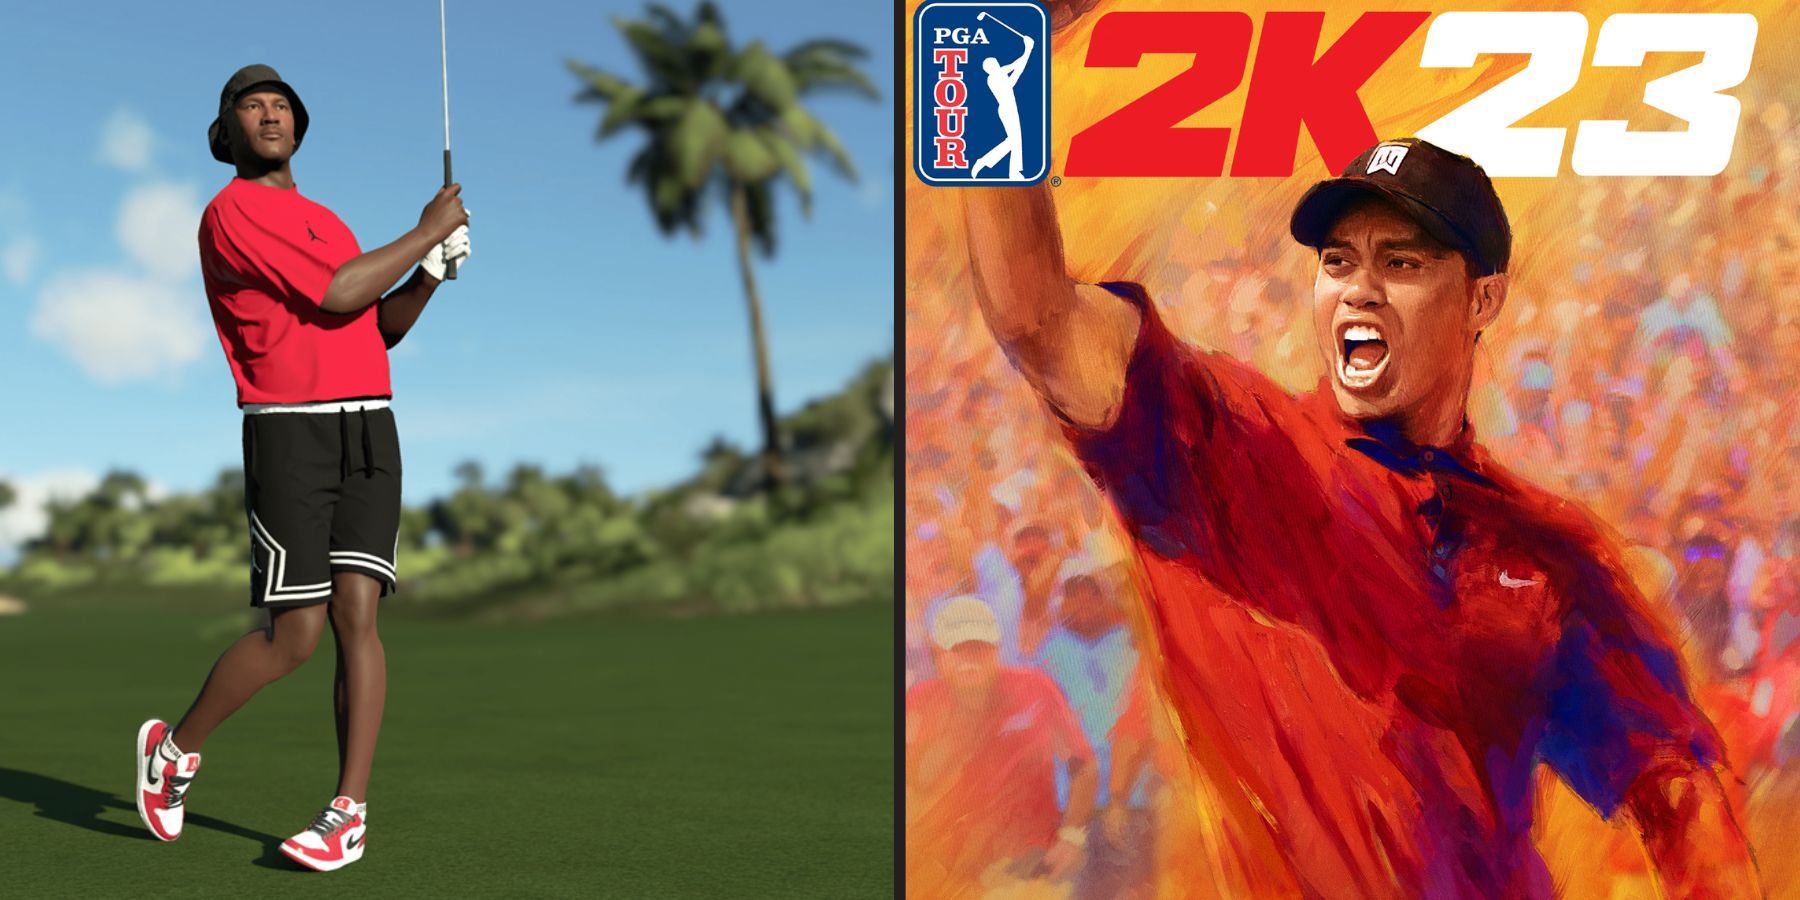 How to play online & with friends in PGA Tour 2K23